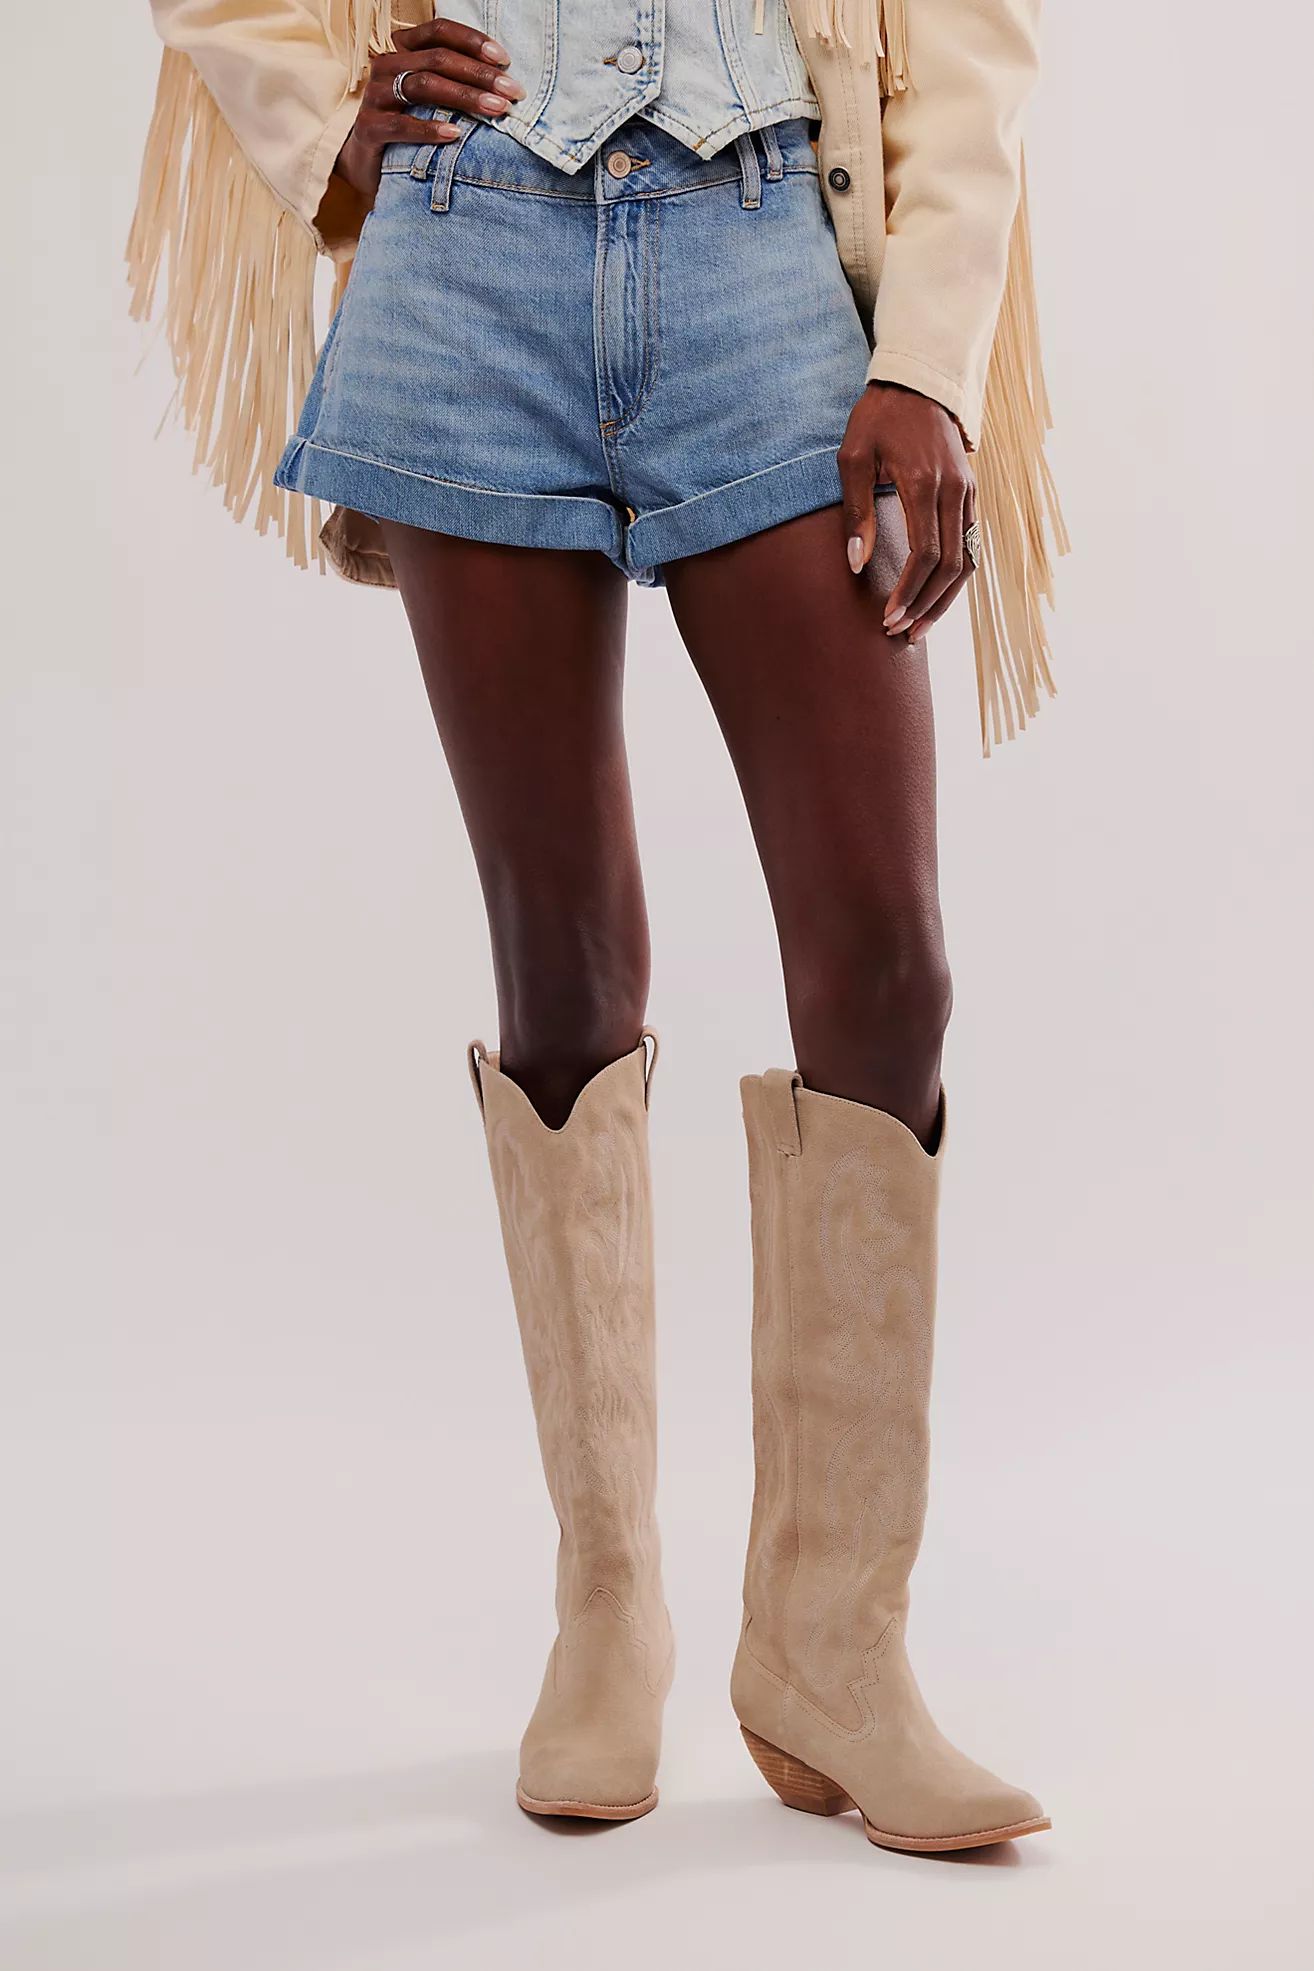 Finn Tall Western Boots | Free People (Global - UK&FR Excluded)